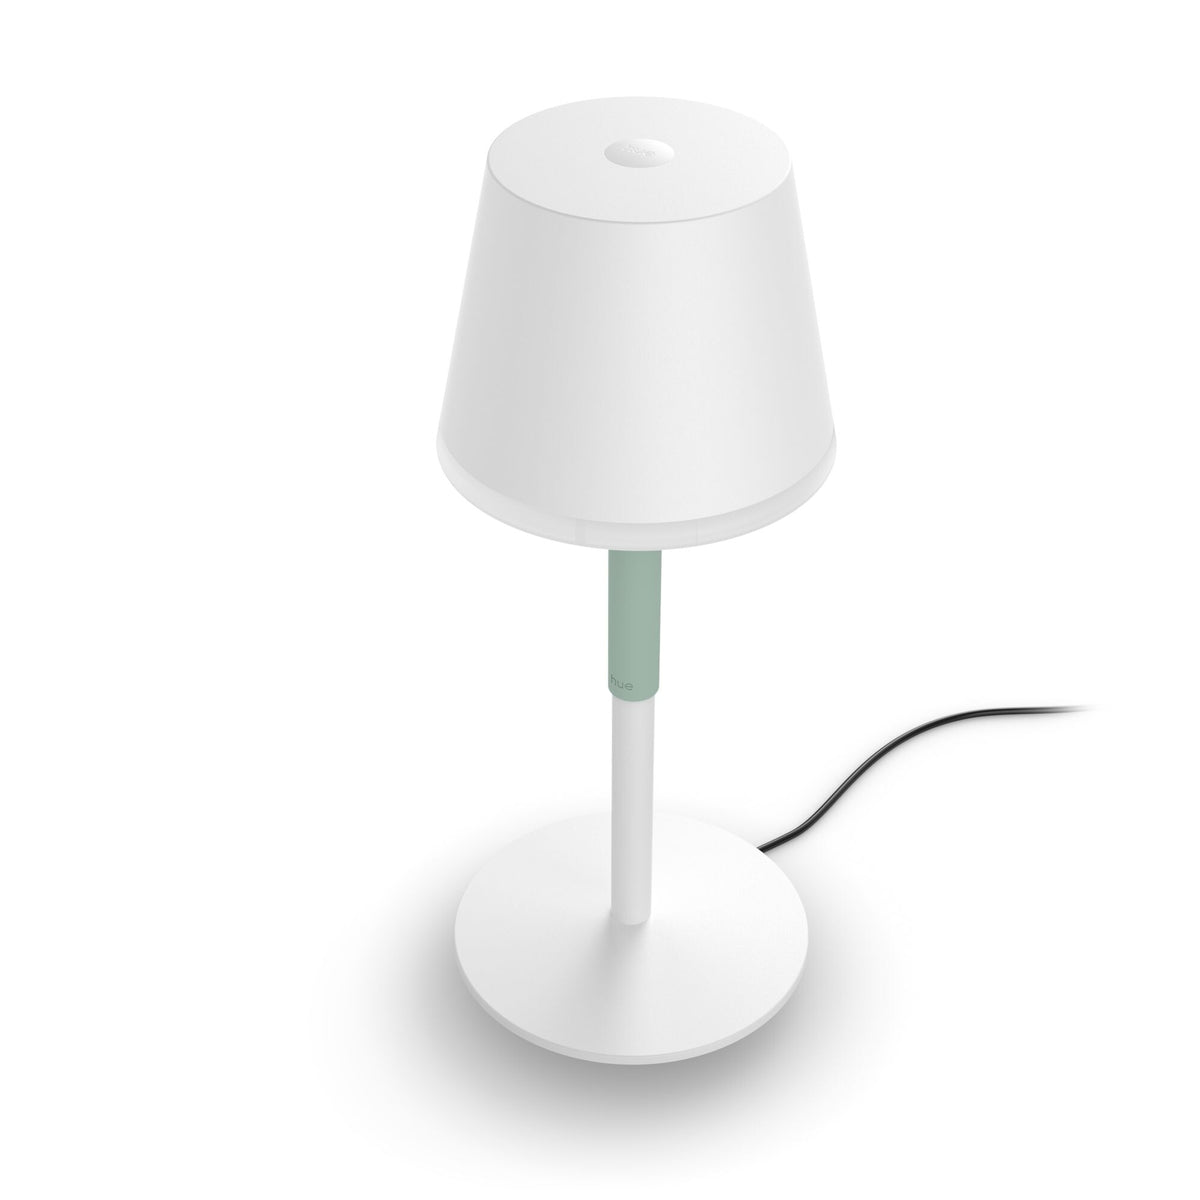 Philips Go portable table lamp in White - White and colour ambience